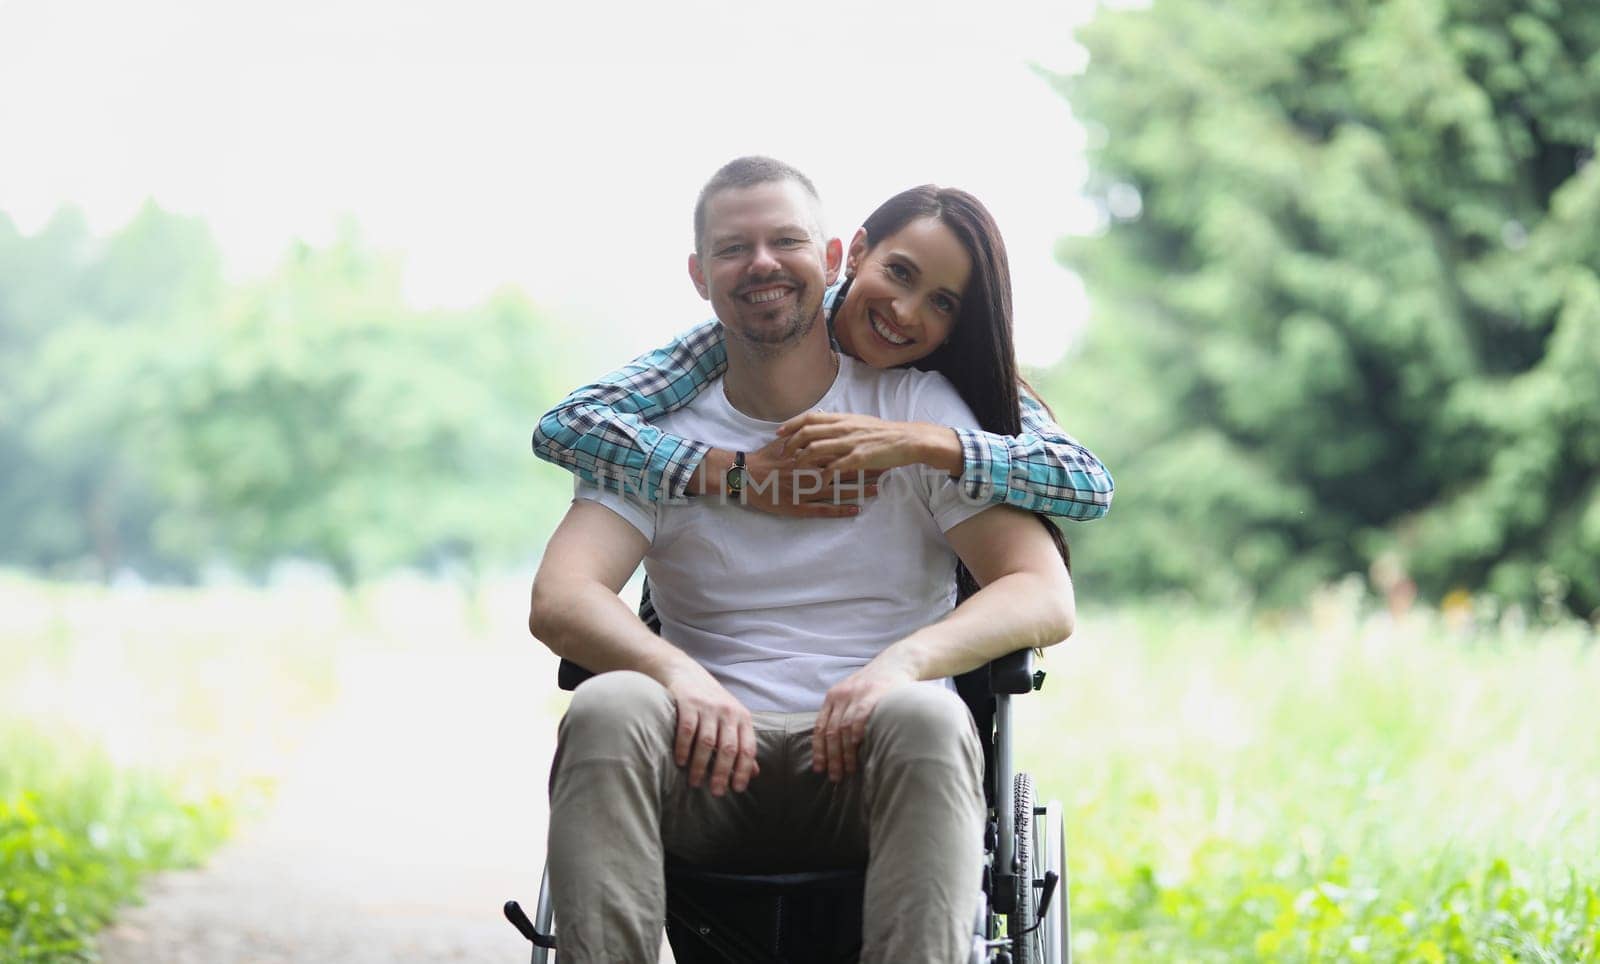 Woman hugging man in wheelchair in park portrait. Close relationship with disabled people concept